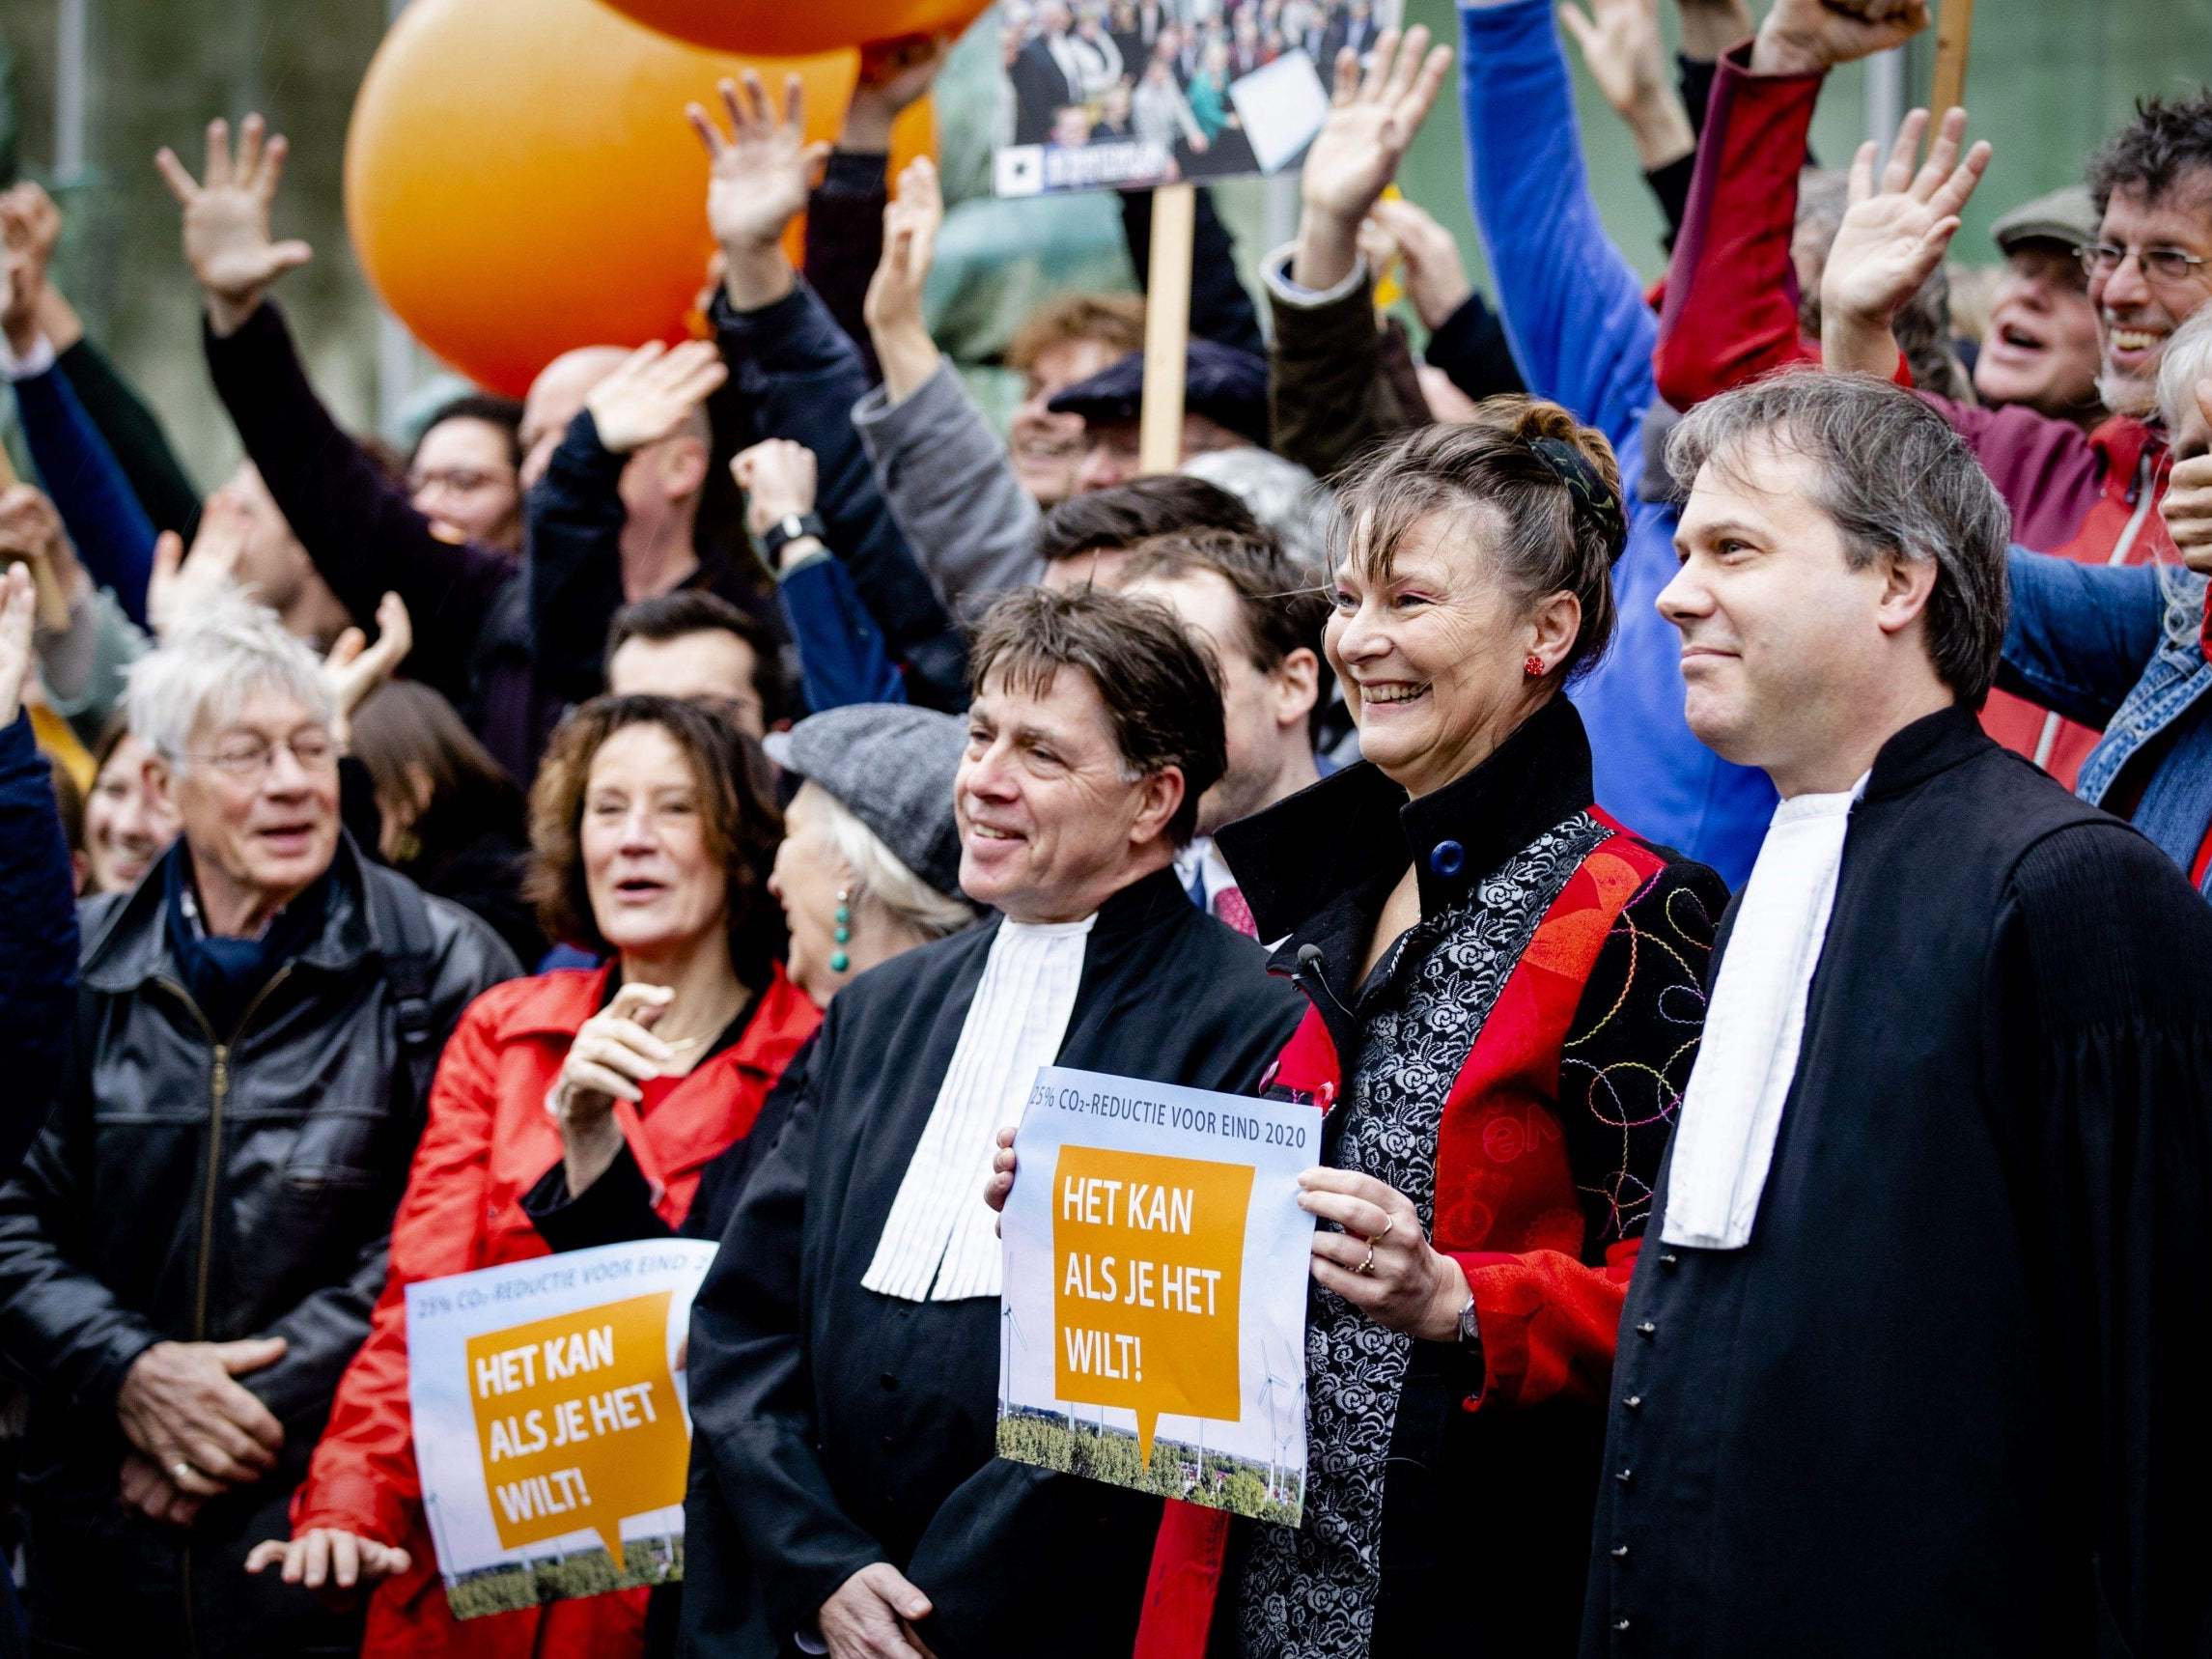 Marjan Minnesma (second on right), director of environment NGO Urgenda, holds a banner outside the Supreme Court prior its ruling in the Urgenda case on 20 December in The Hague